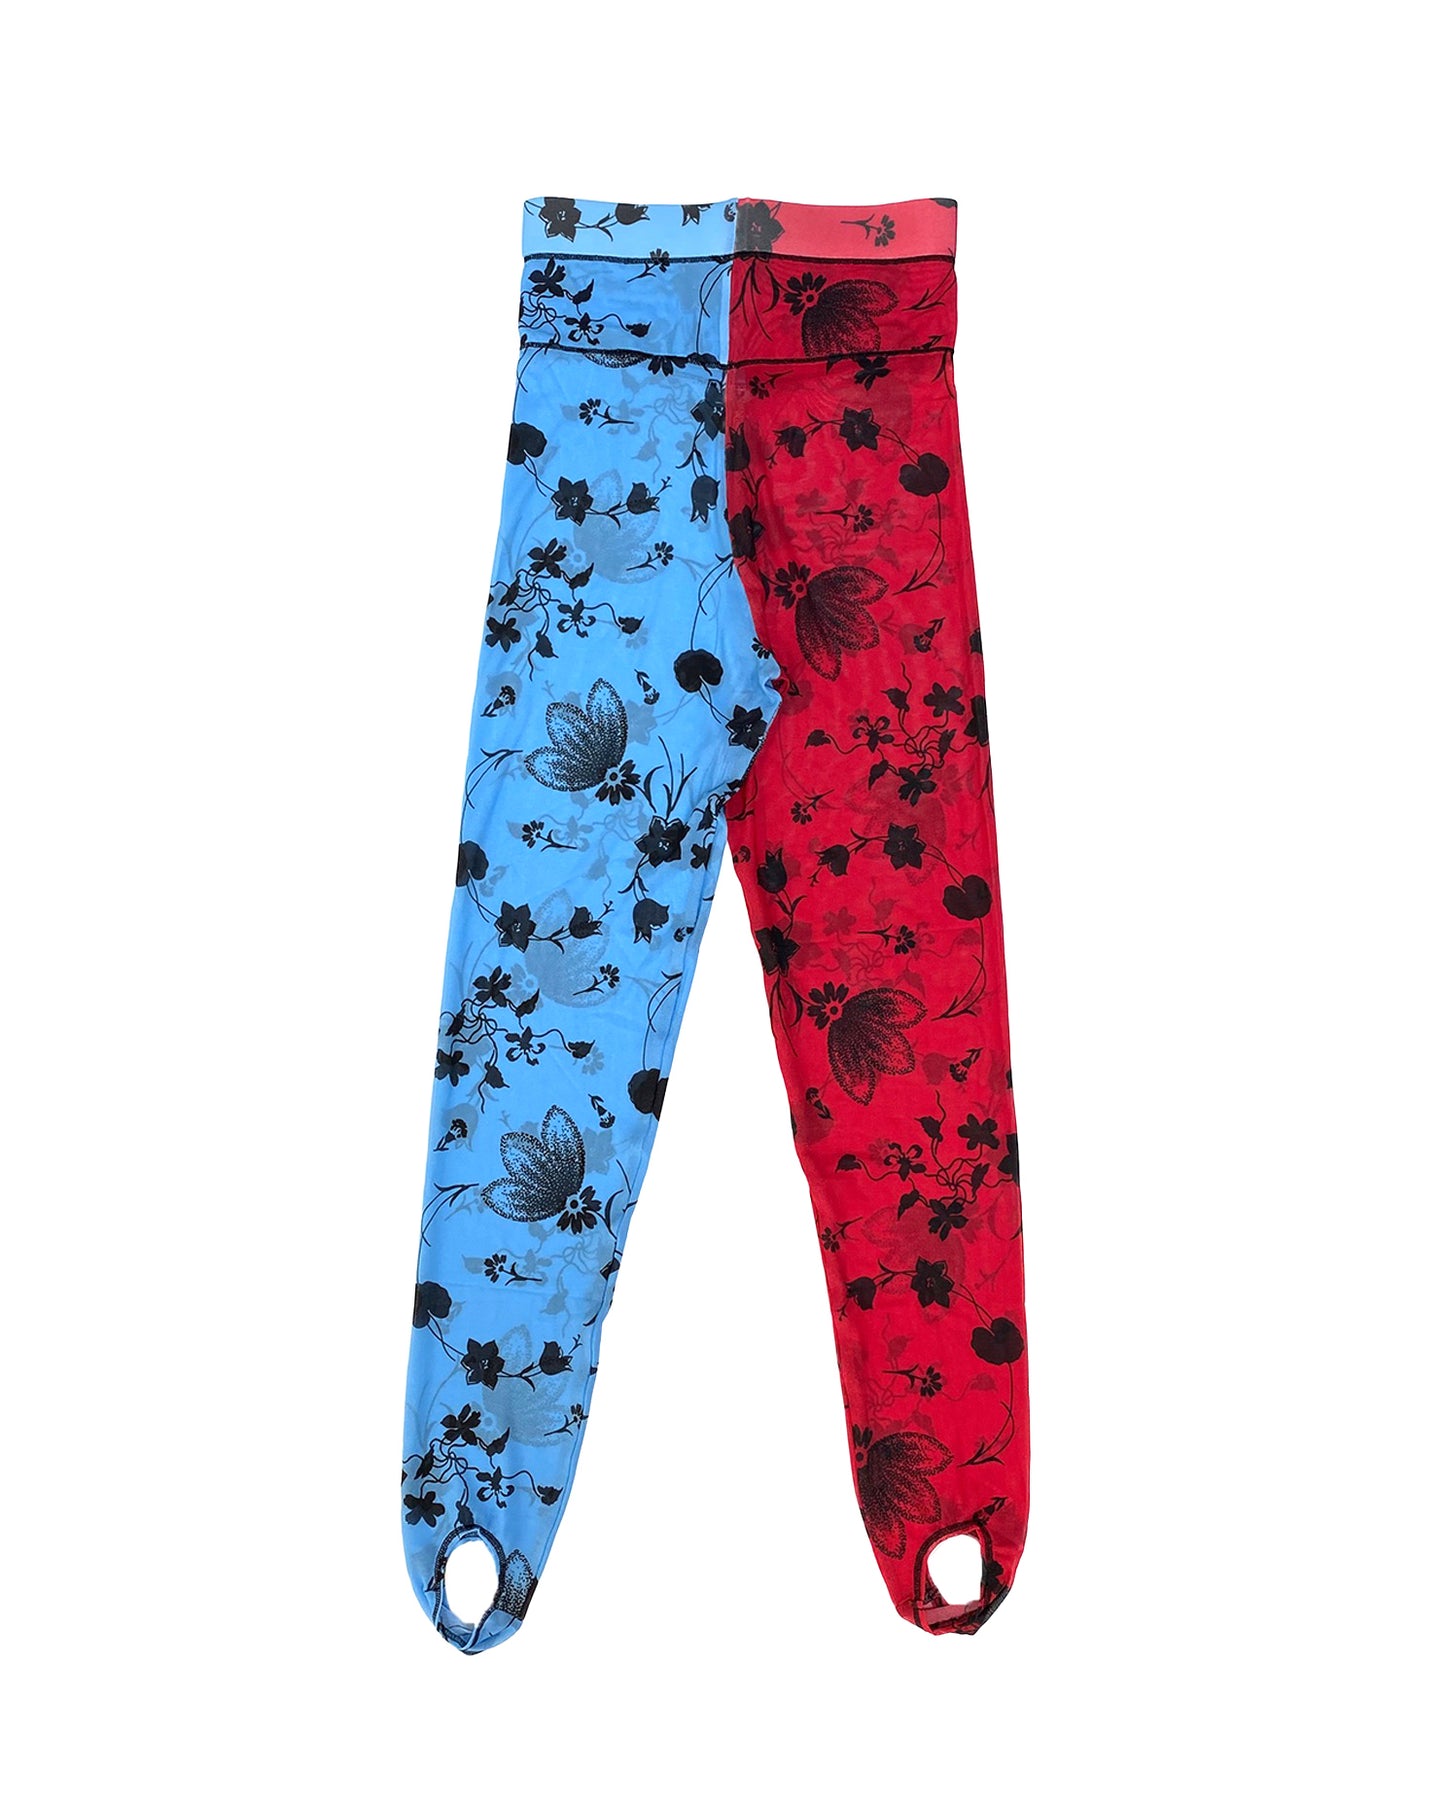 Blue and Red Floral Mesh Leggings